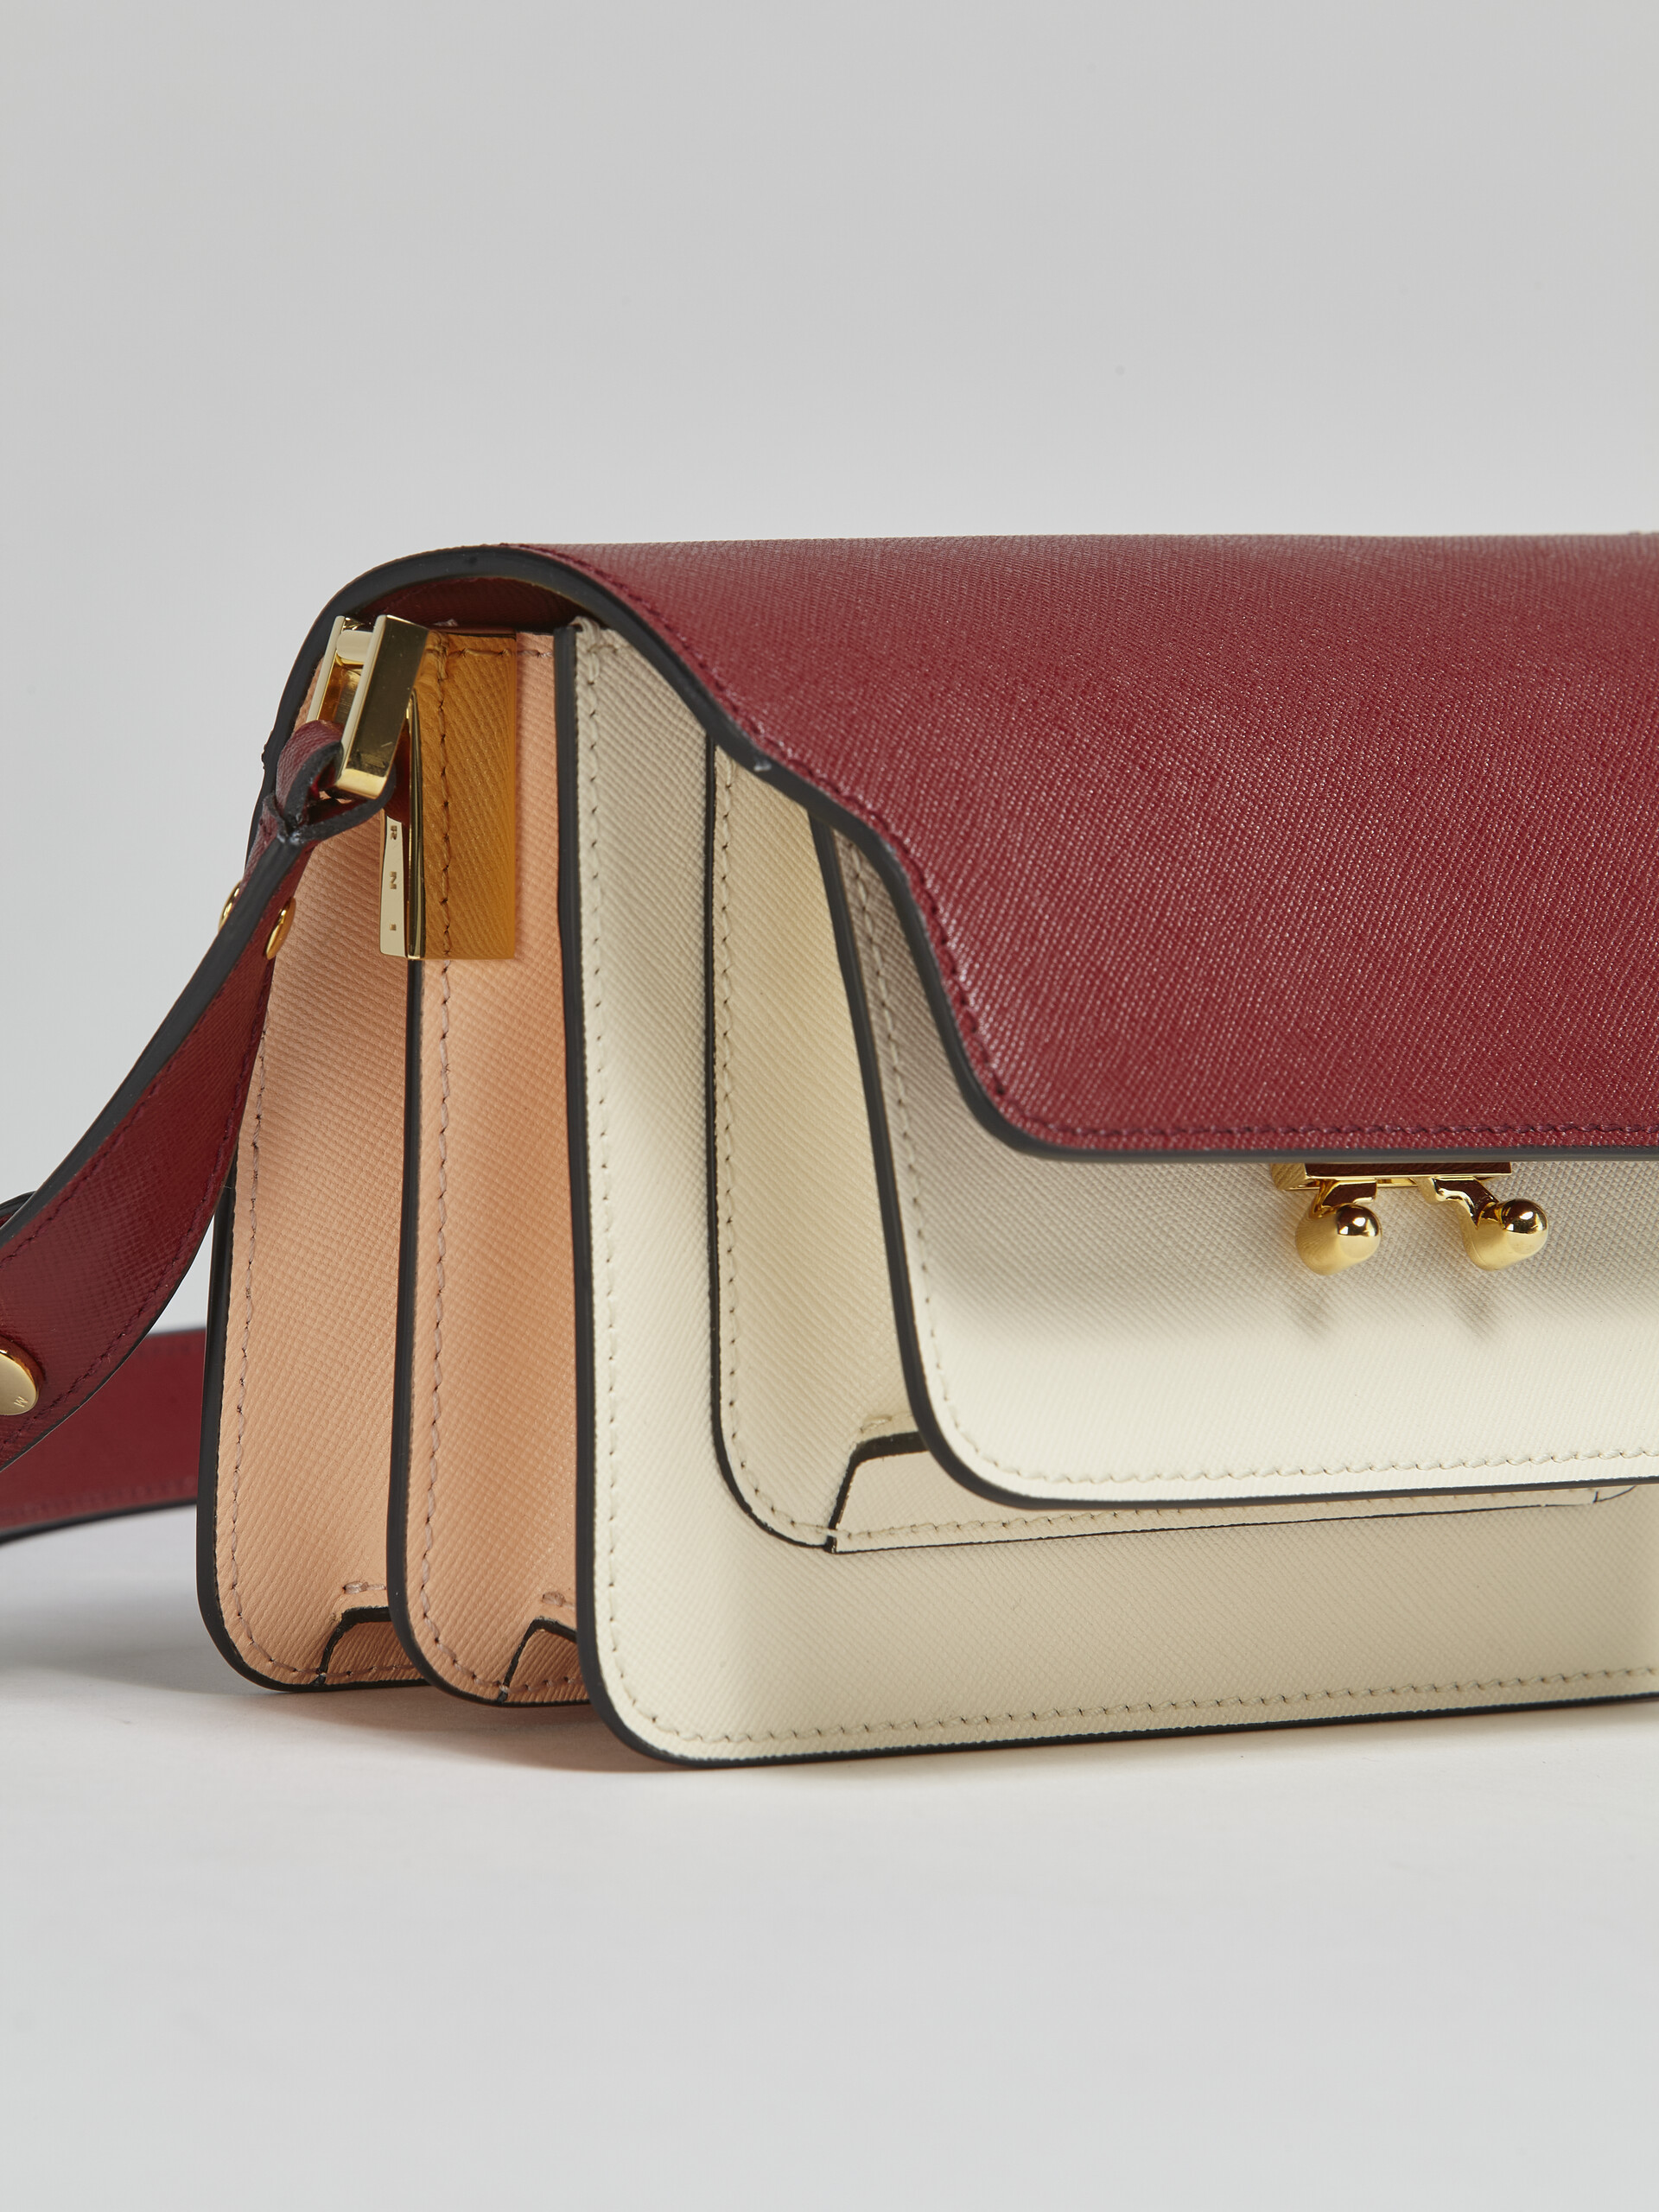 TRUNK mini bag in red white and pink saffiano leather - Shoulder Bags - Image 4